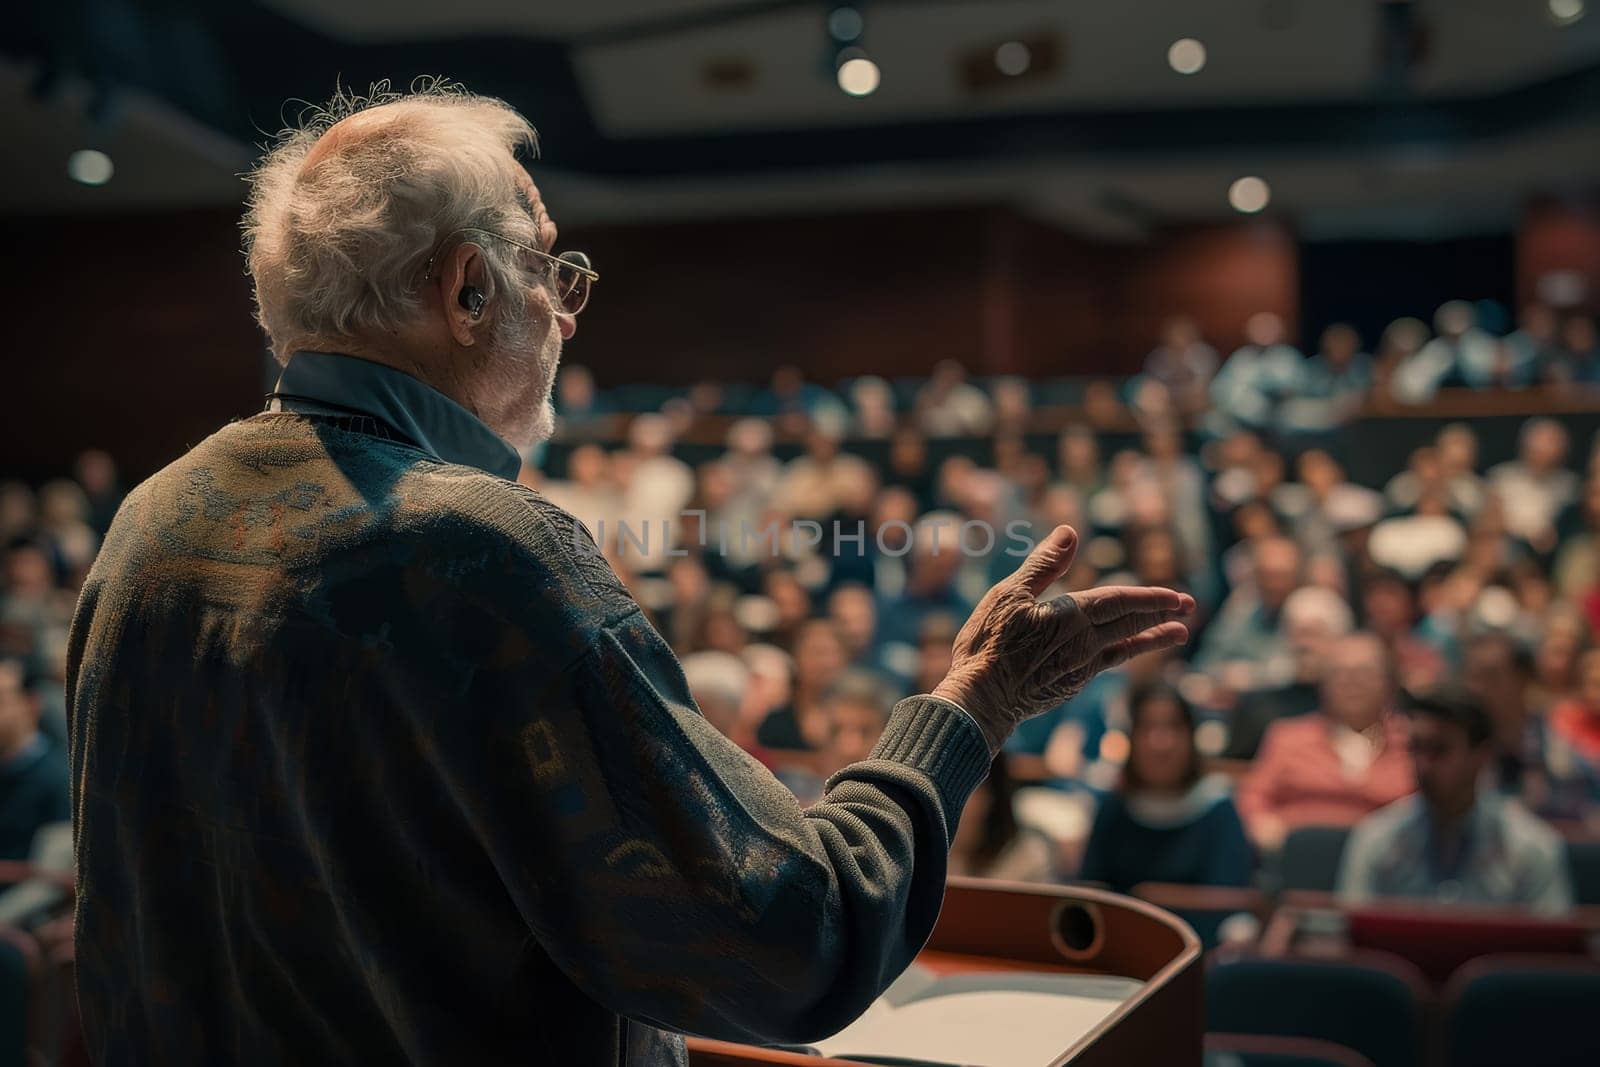 An informed individual with Parkinson's engages an audience at an awareness event. His speech is a powerful tool for education and community support